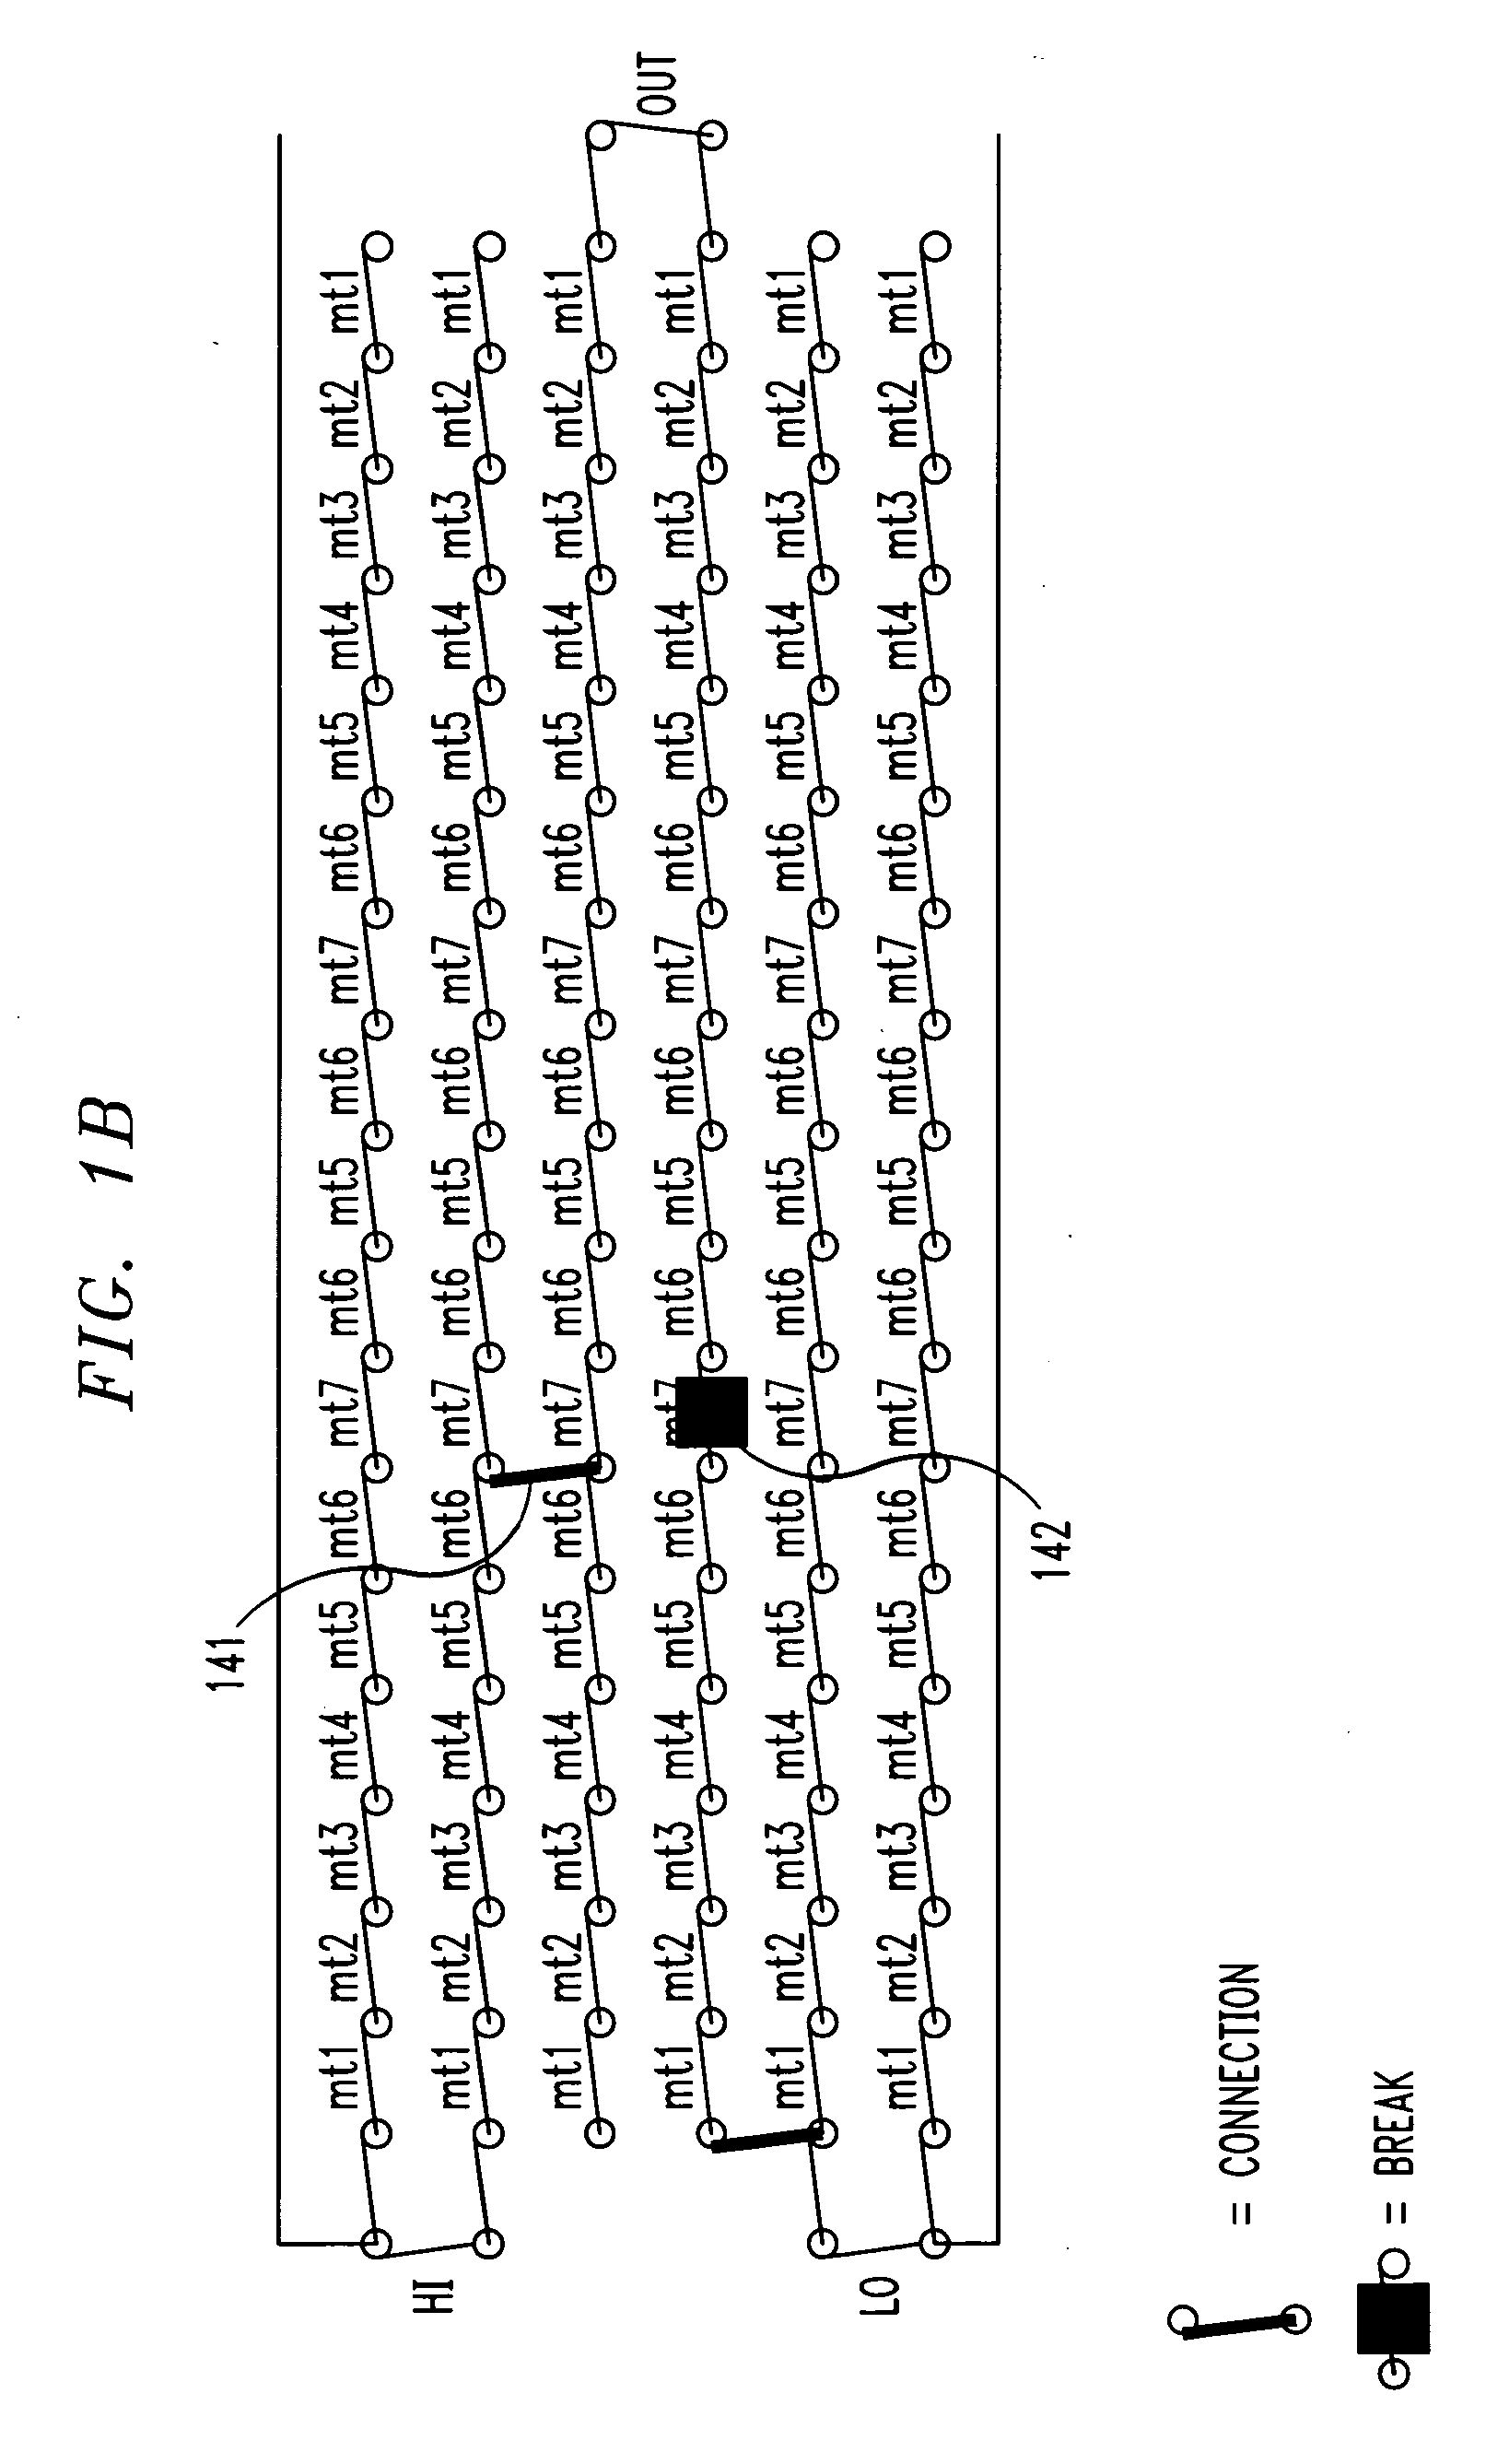 Techniques for facilitating identification updates in an integrated circuit